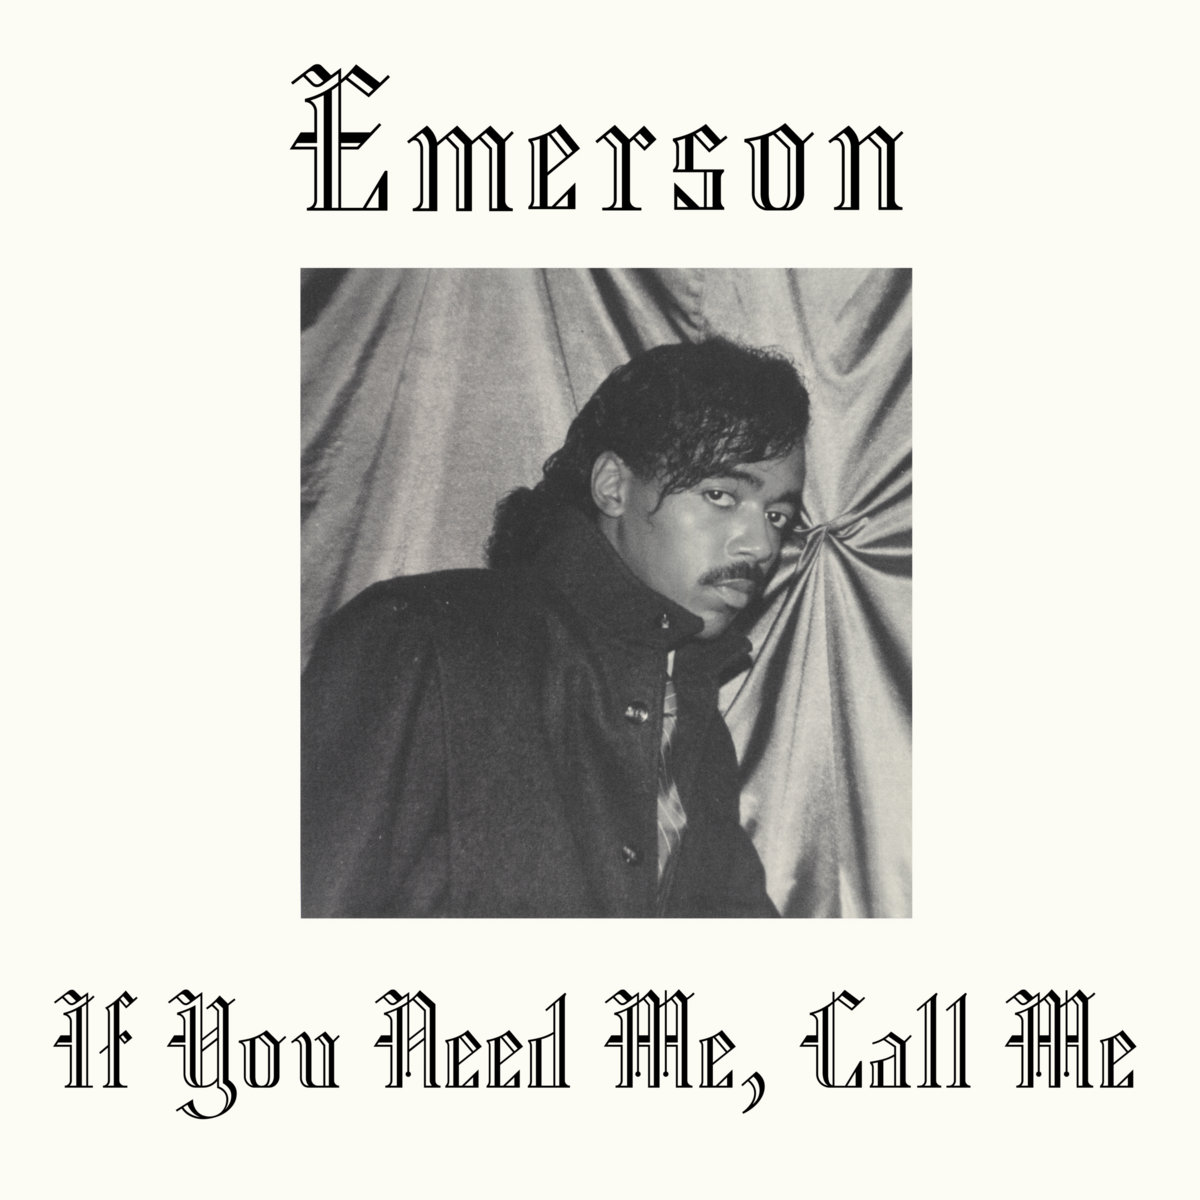 Something a lil different today: Emerson - If You Need Me, Call MeWonderful blend of electrofunk, boogie and 80s soul. Favorite track: Sending all my love (Demo Version) https://kalitarecords.bandcamp.com/album/if-you-need-me-call-me